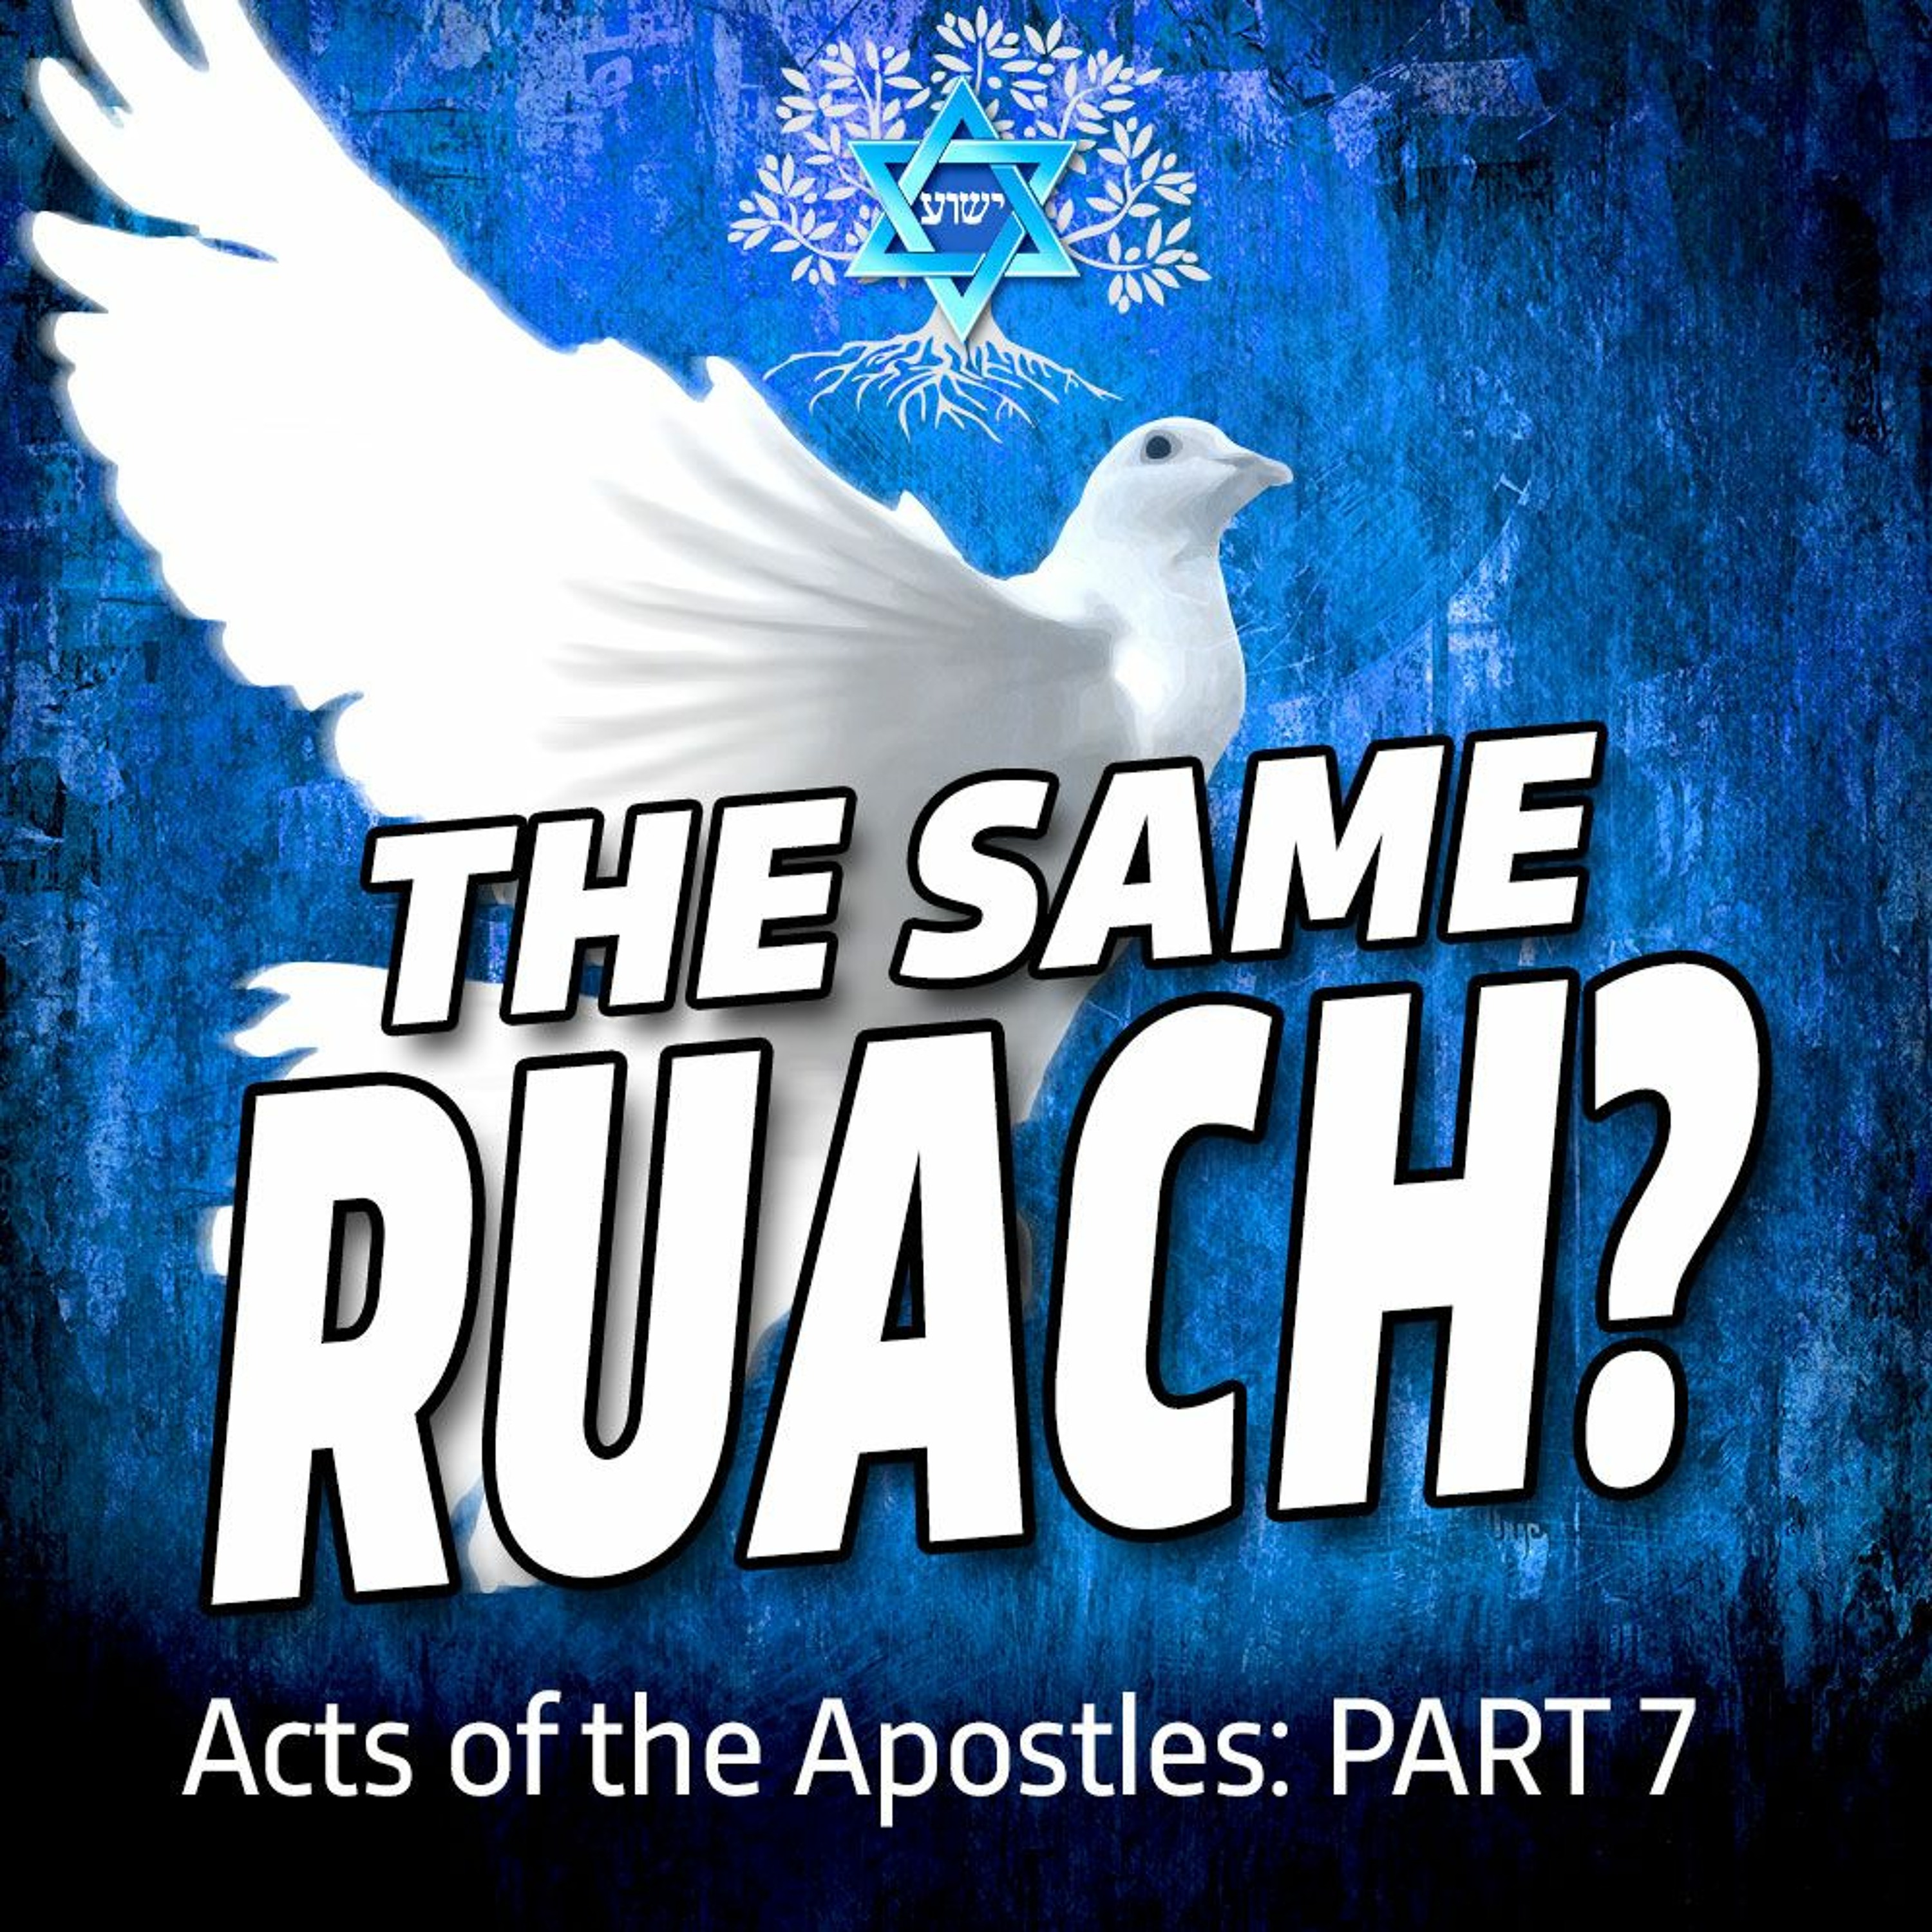 Acts Of The Apostles- Part 7 - The Same Ruach